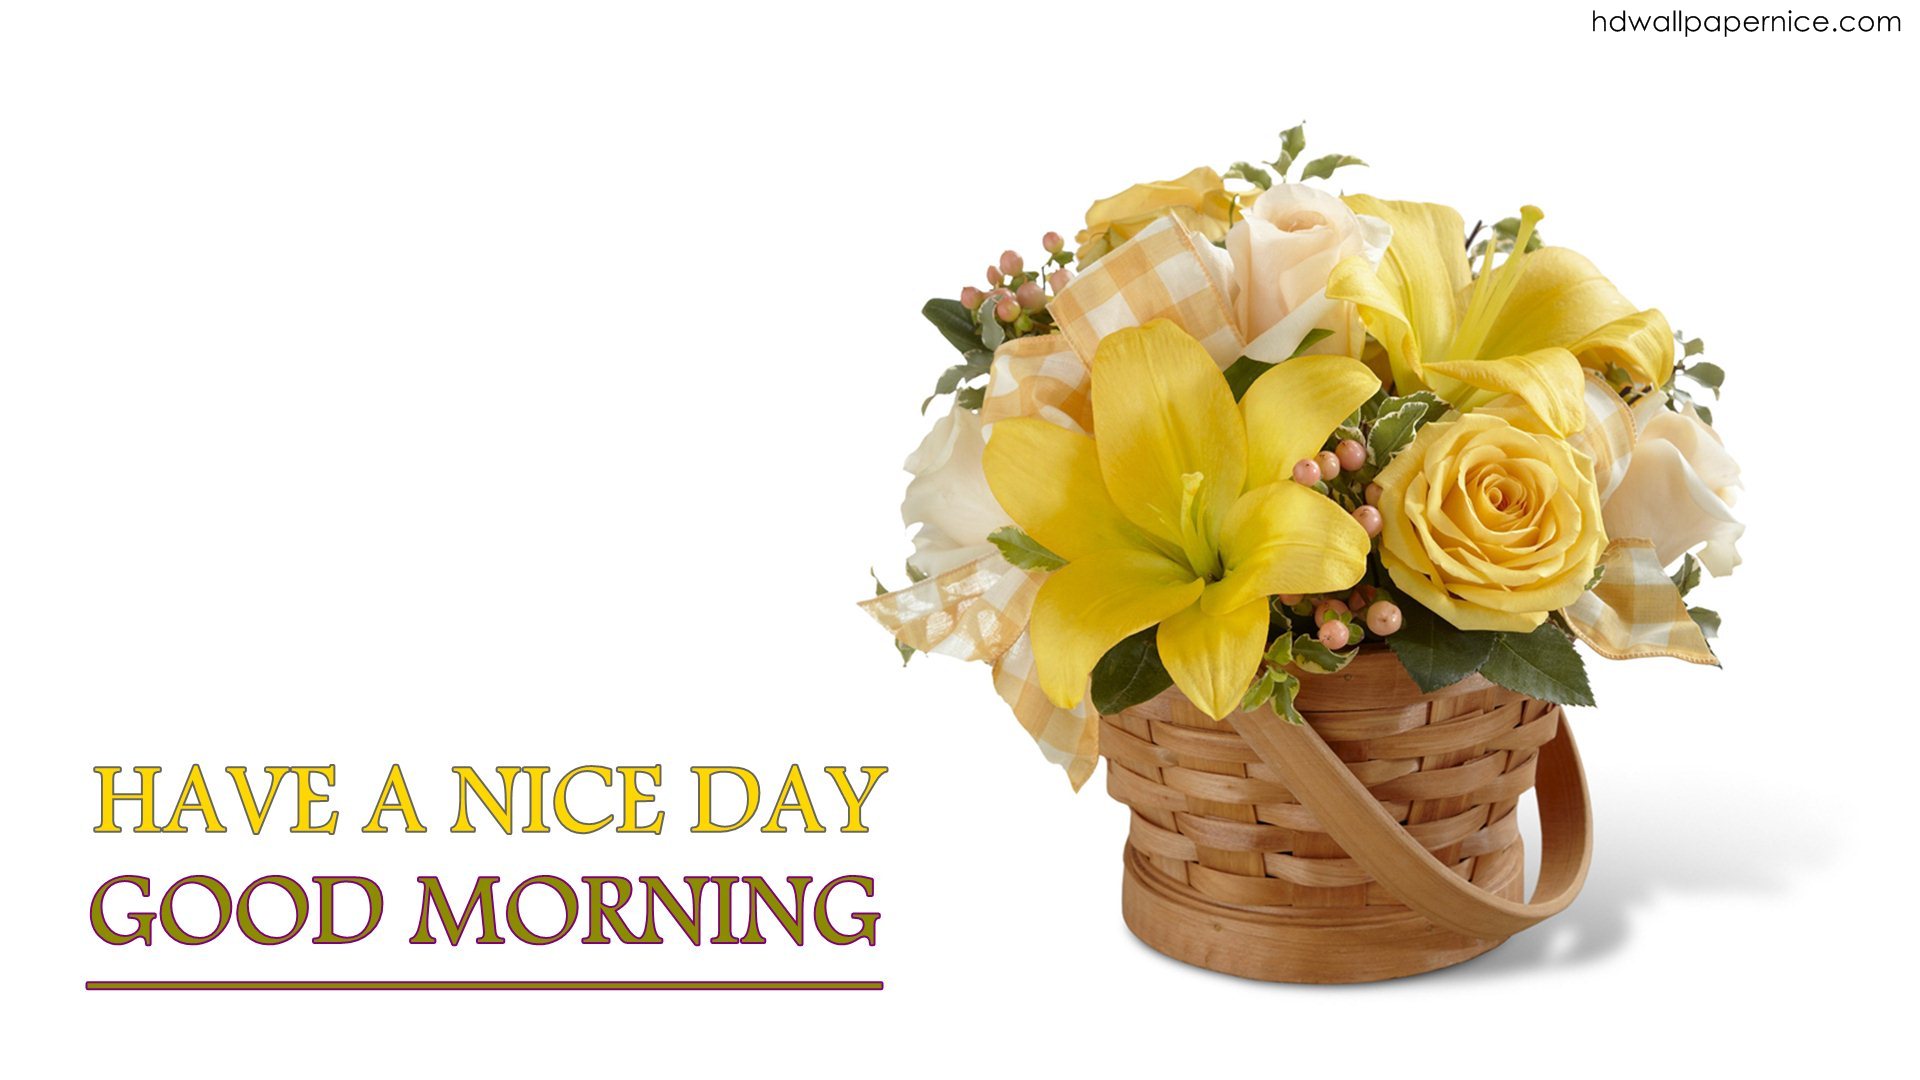 Good Morning Have A Nice Day Wallpaper 49 Pictures - Have A Nice Day Good Morning , HD Wallpaper & Backgrounds